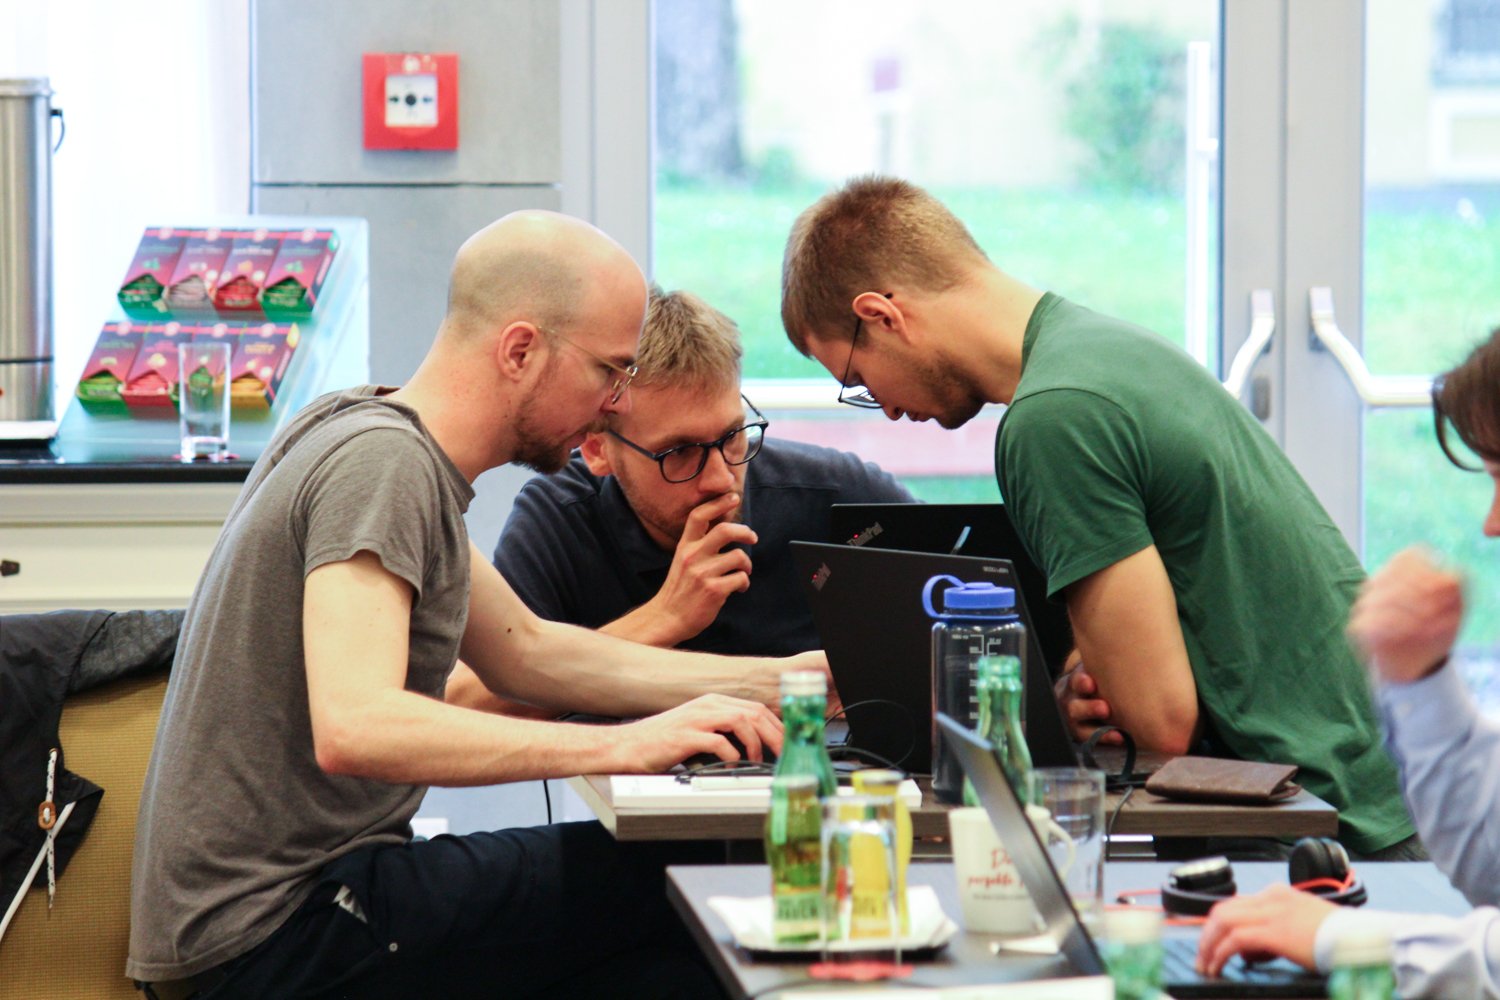 Three hackathon participants looking at their screens together